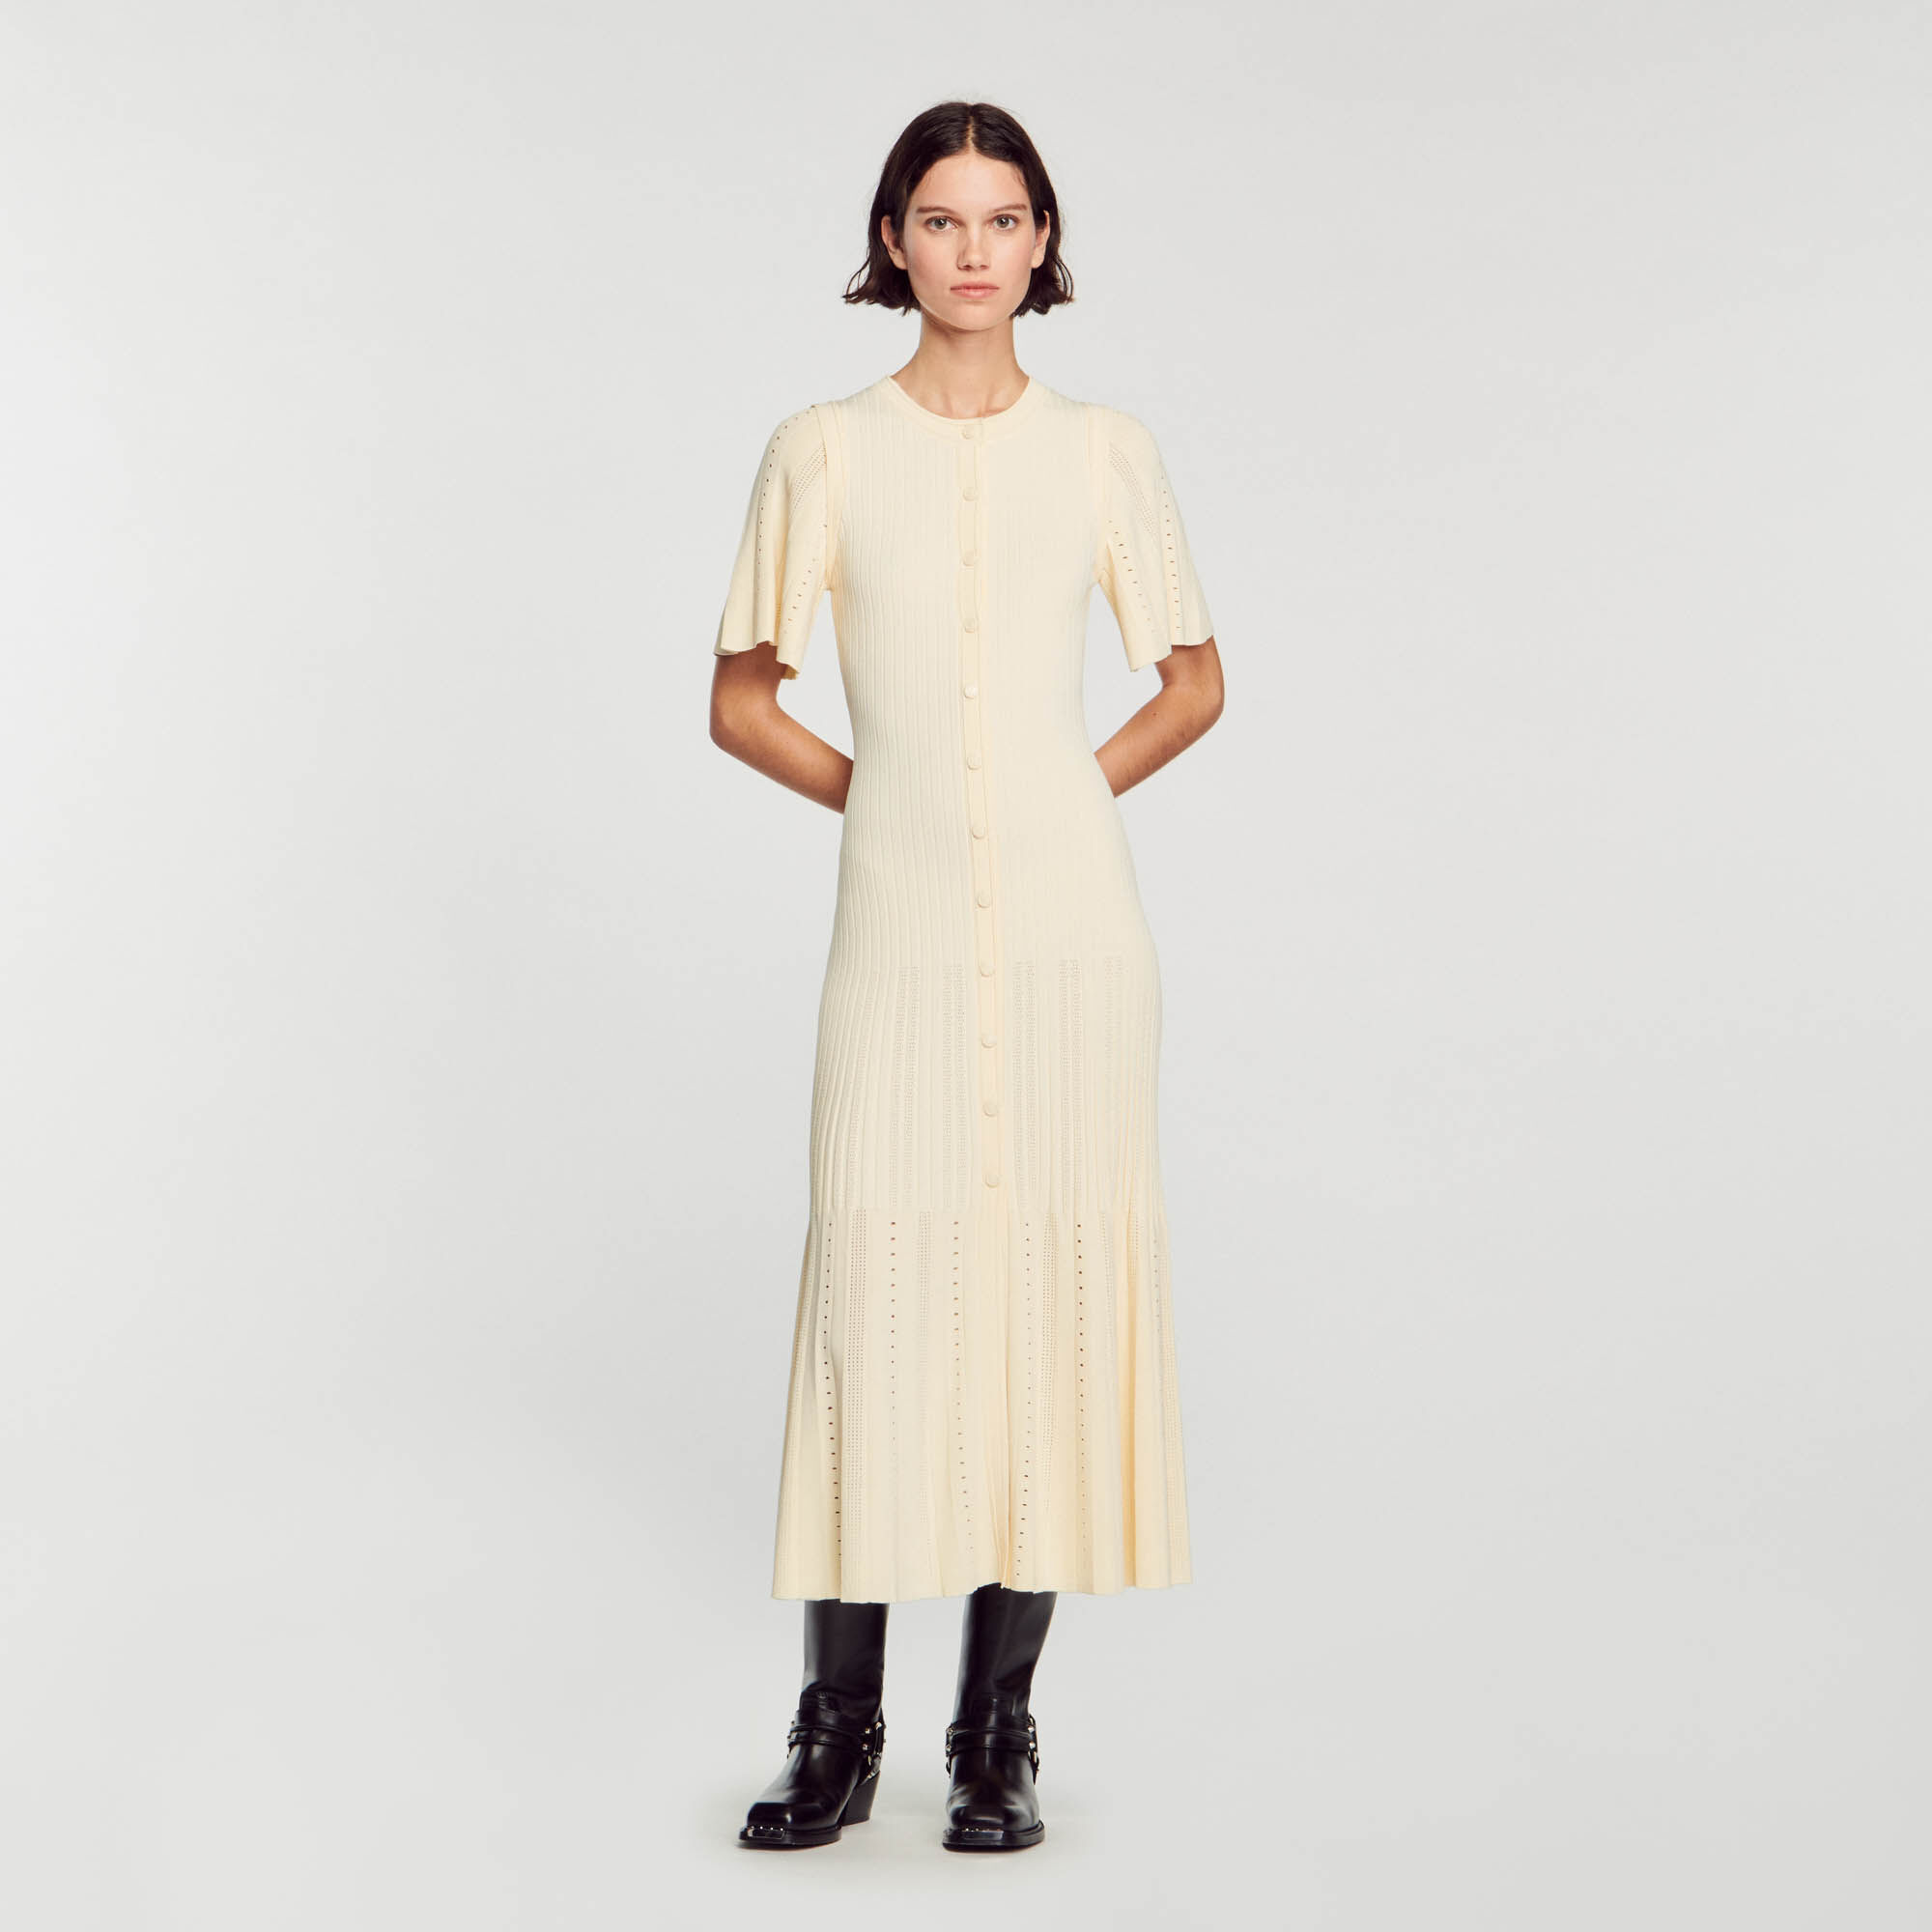 Women's dresses – For every occasion | SANDRO